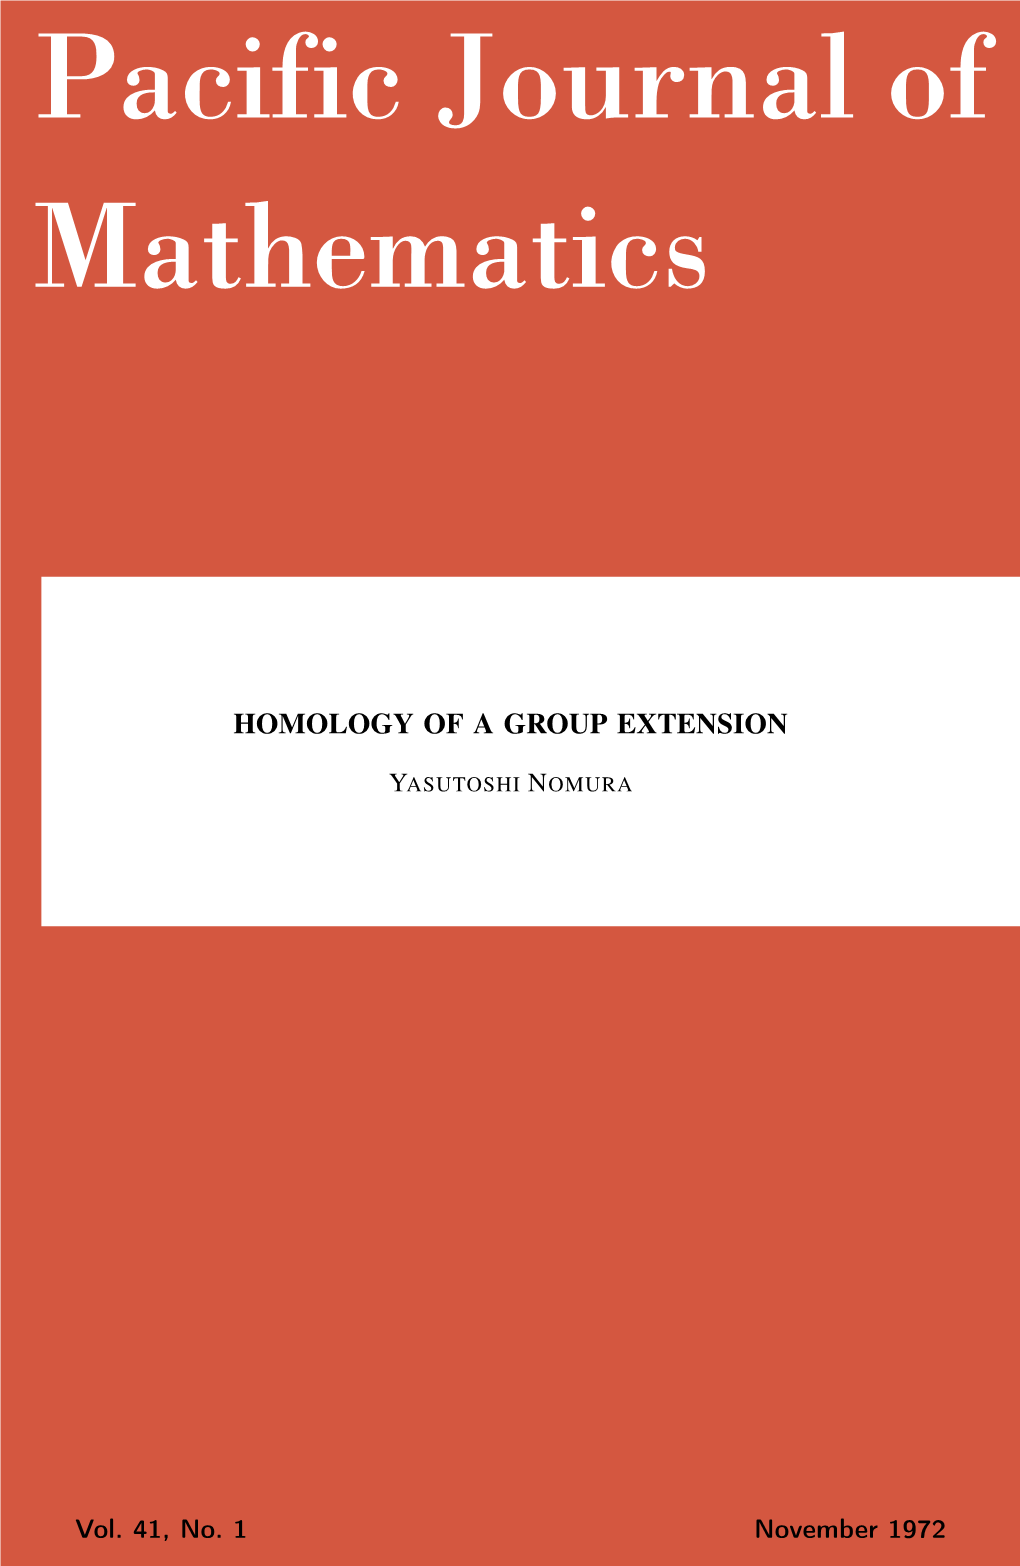 Homology of a Group Extension